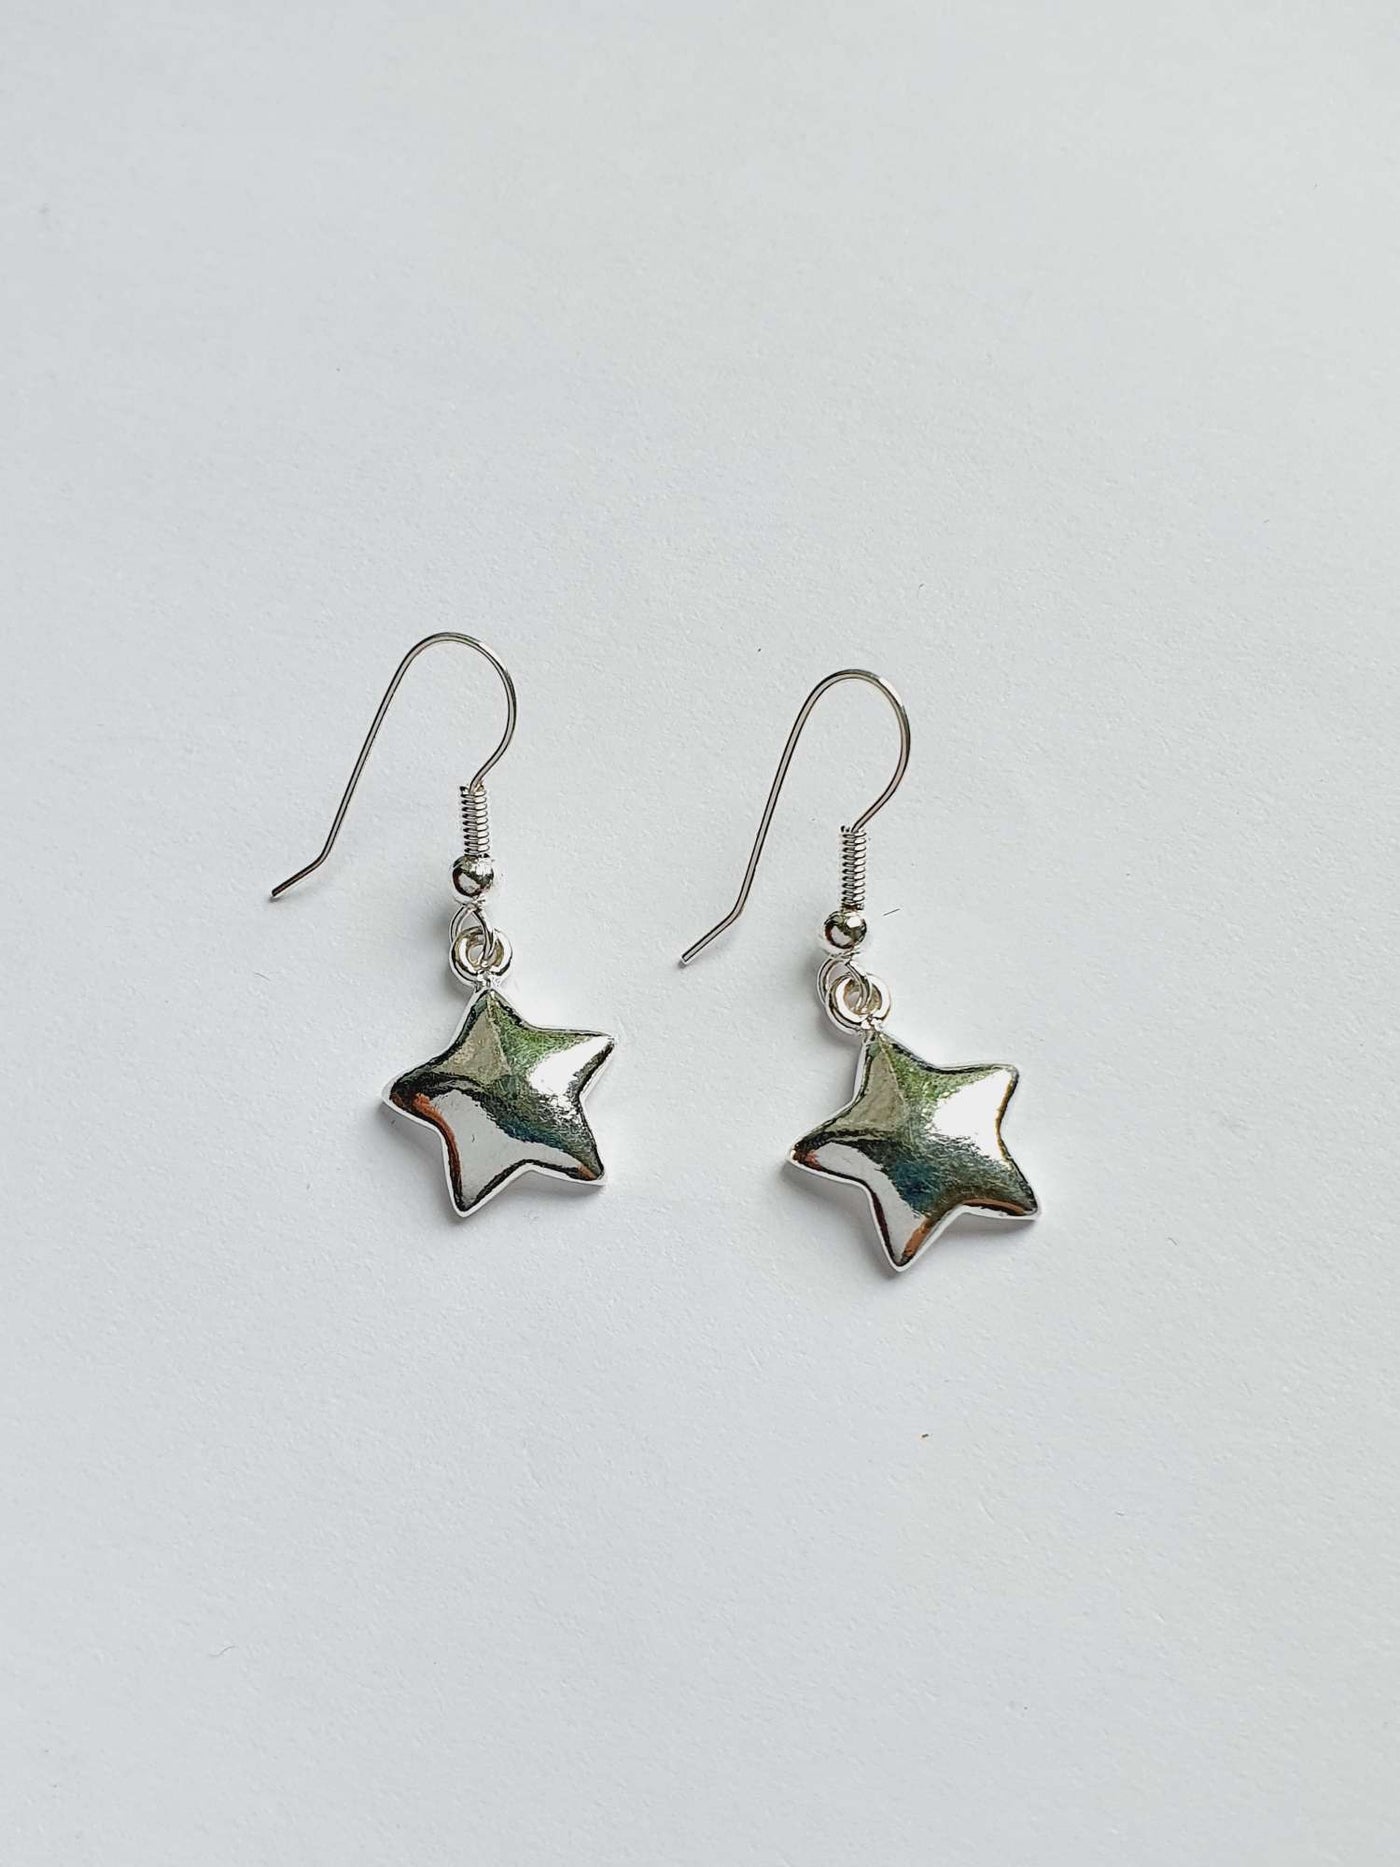 Vintage Silver Plated Drop Earrings with Star Charm